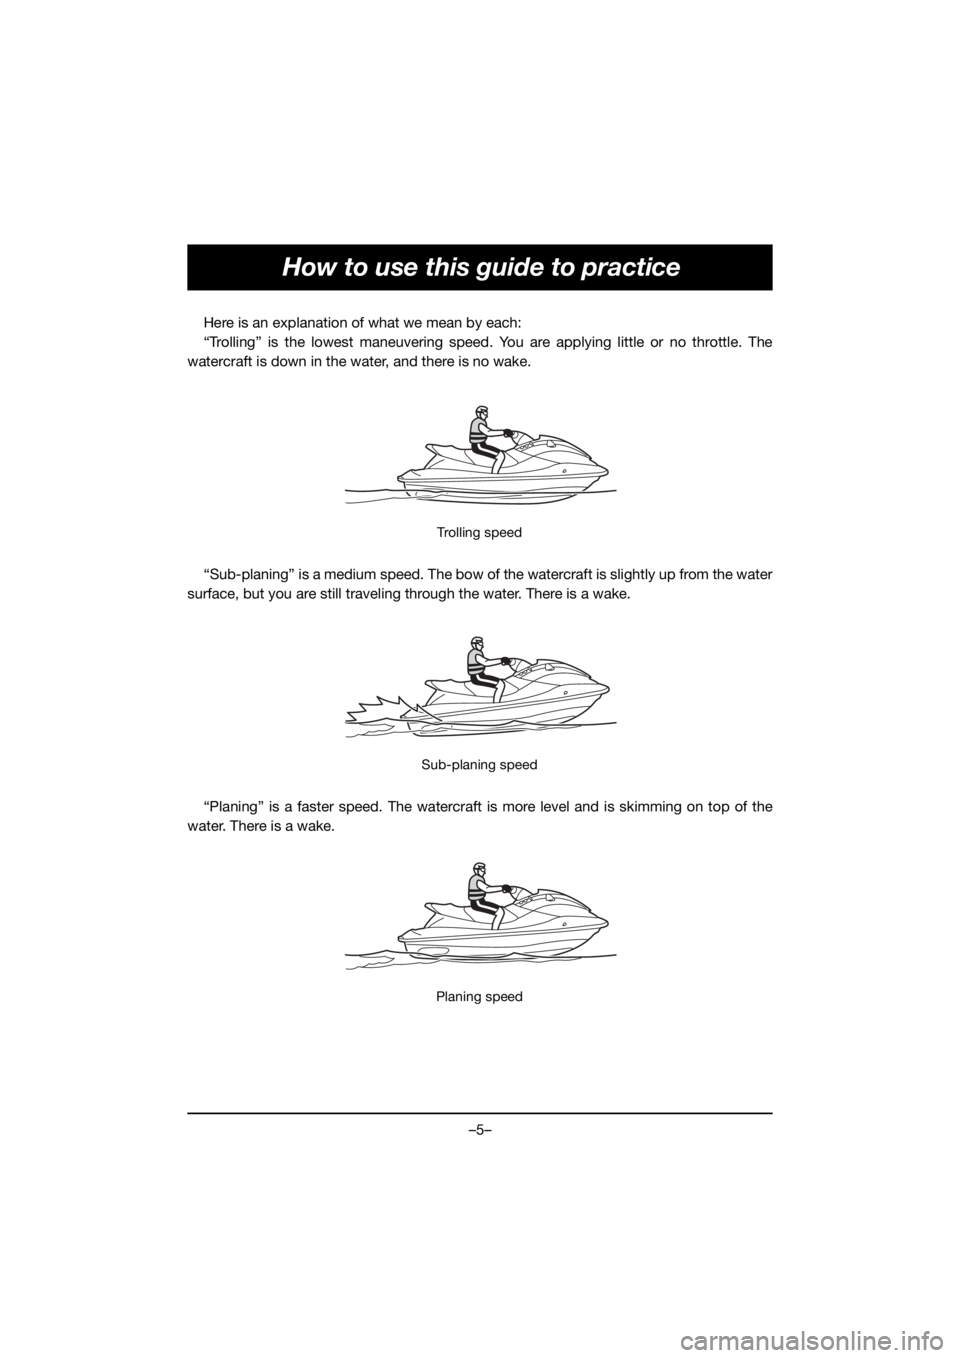 YAMAHA EX 2021  Owners Manual –5–
How to use this guide to practice
Here is an explanation of what we mean by each:
“Trolling” is the lowest maneuvering speed. You are applying little or no throttle. The
watercraft is down